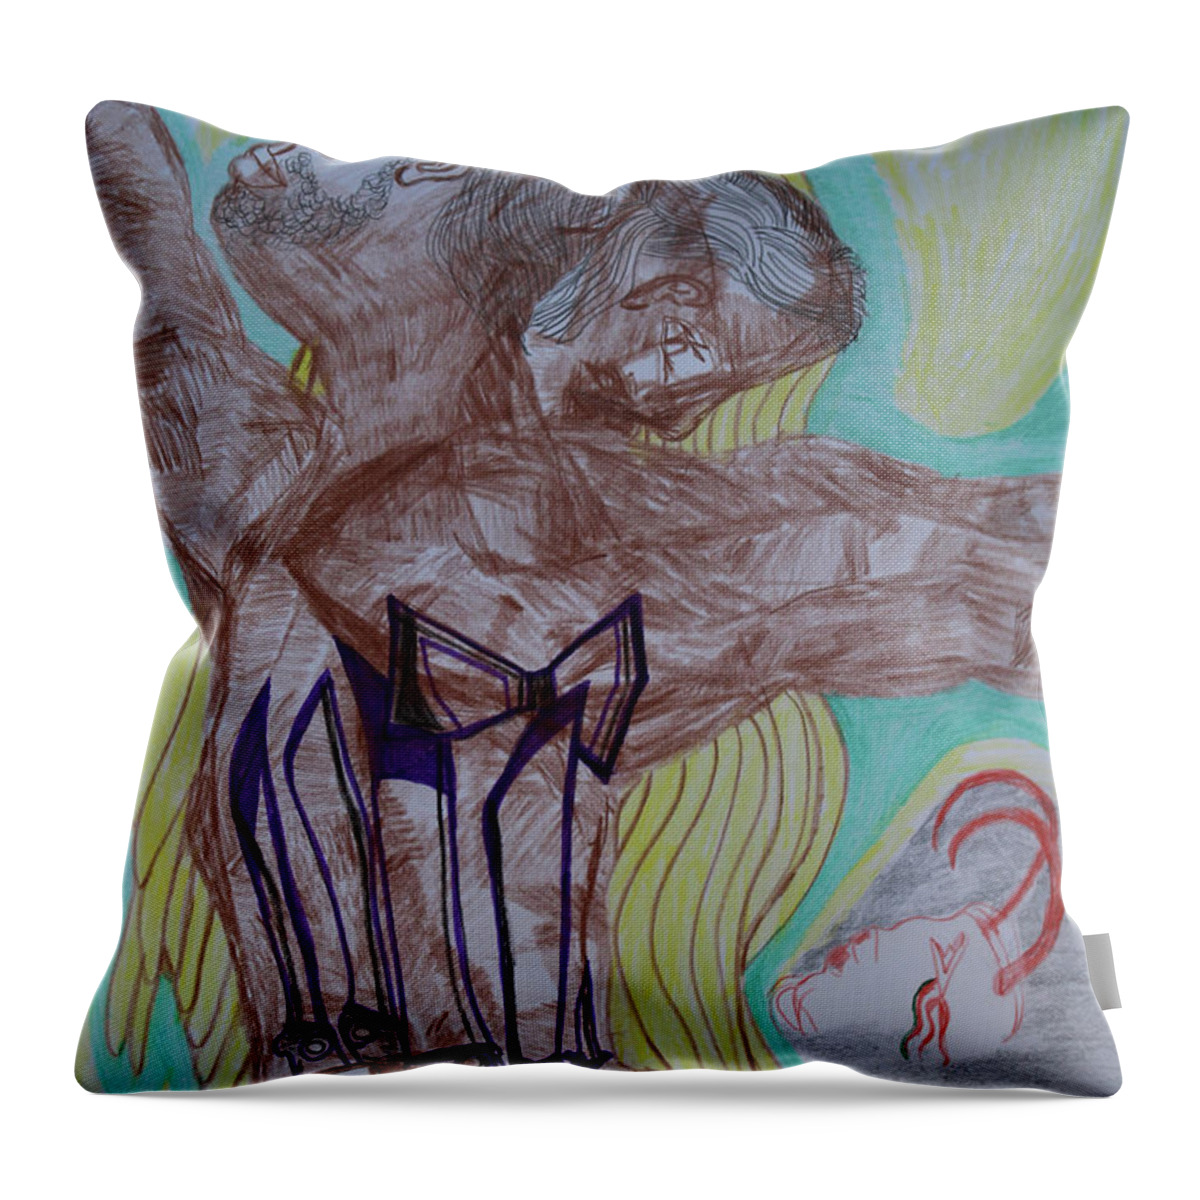 Jesus Throw Pillow featuring the painting St Michael The Archangel #9 by Gloria Ssali